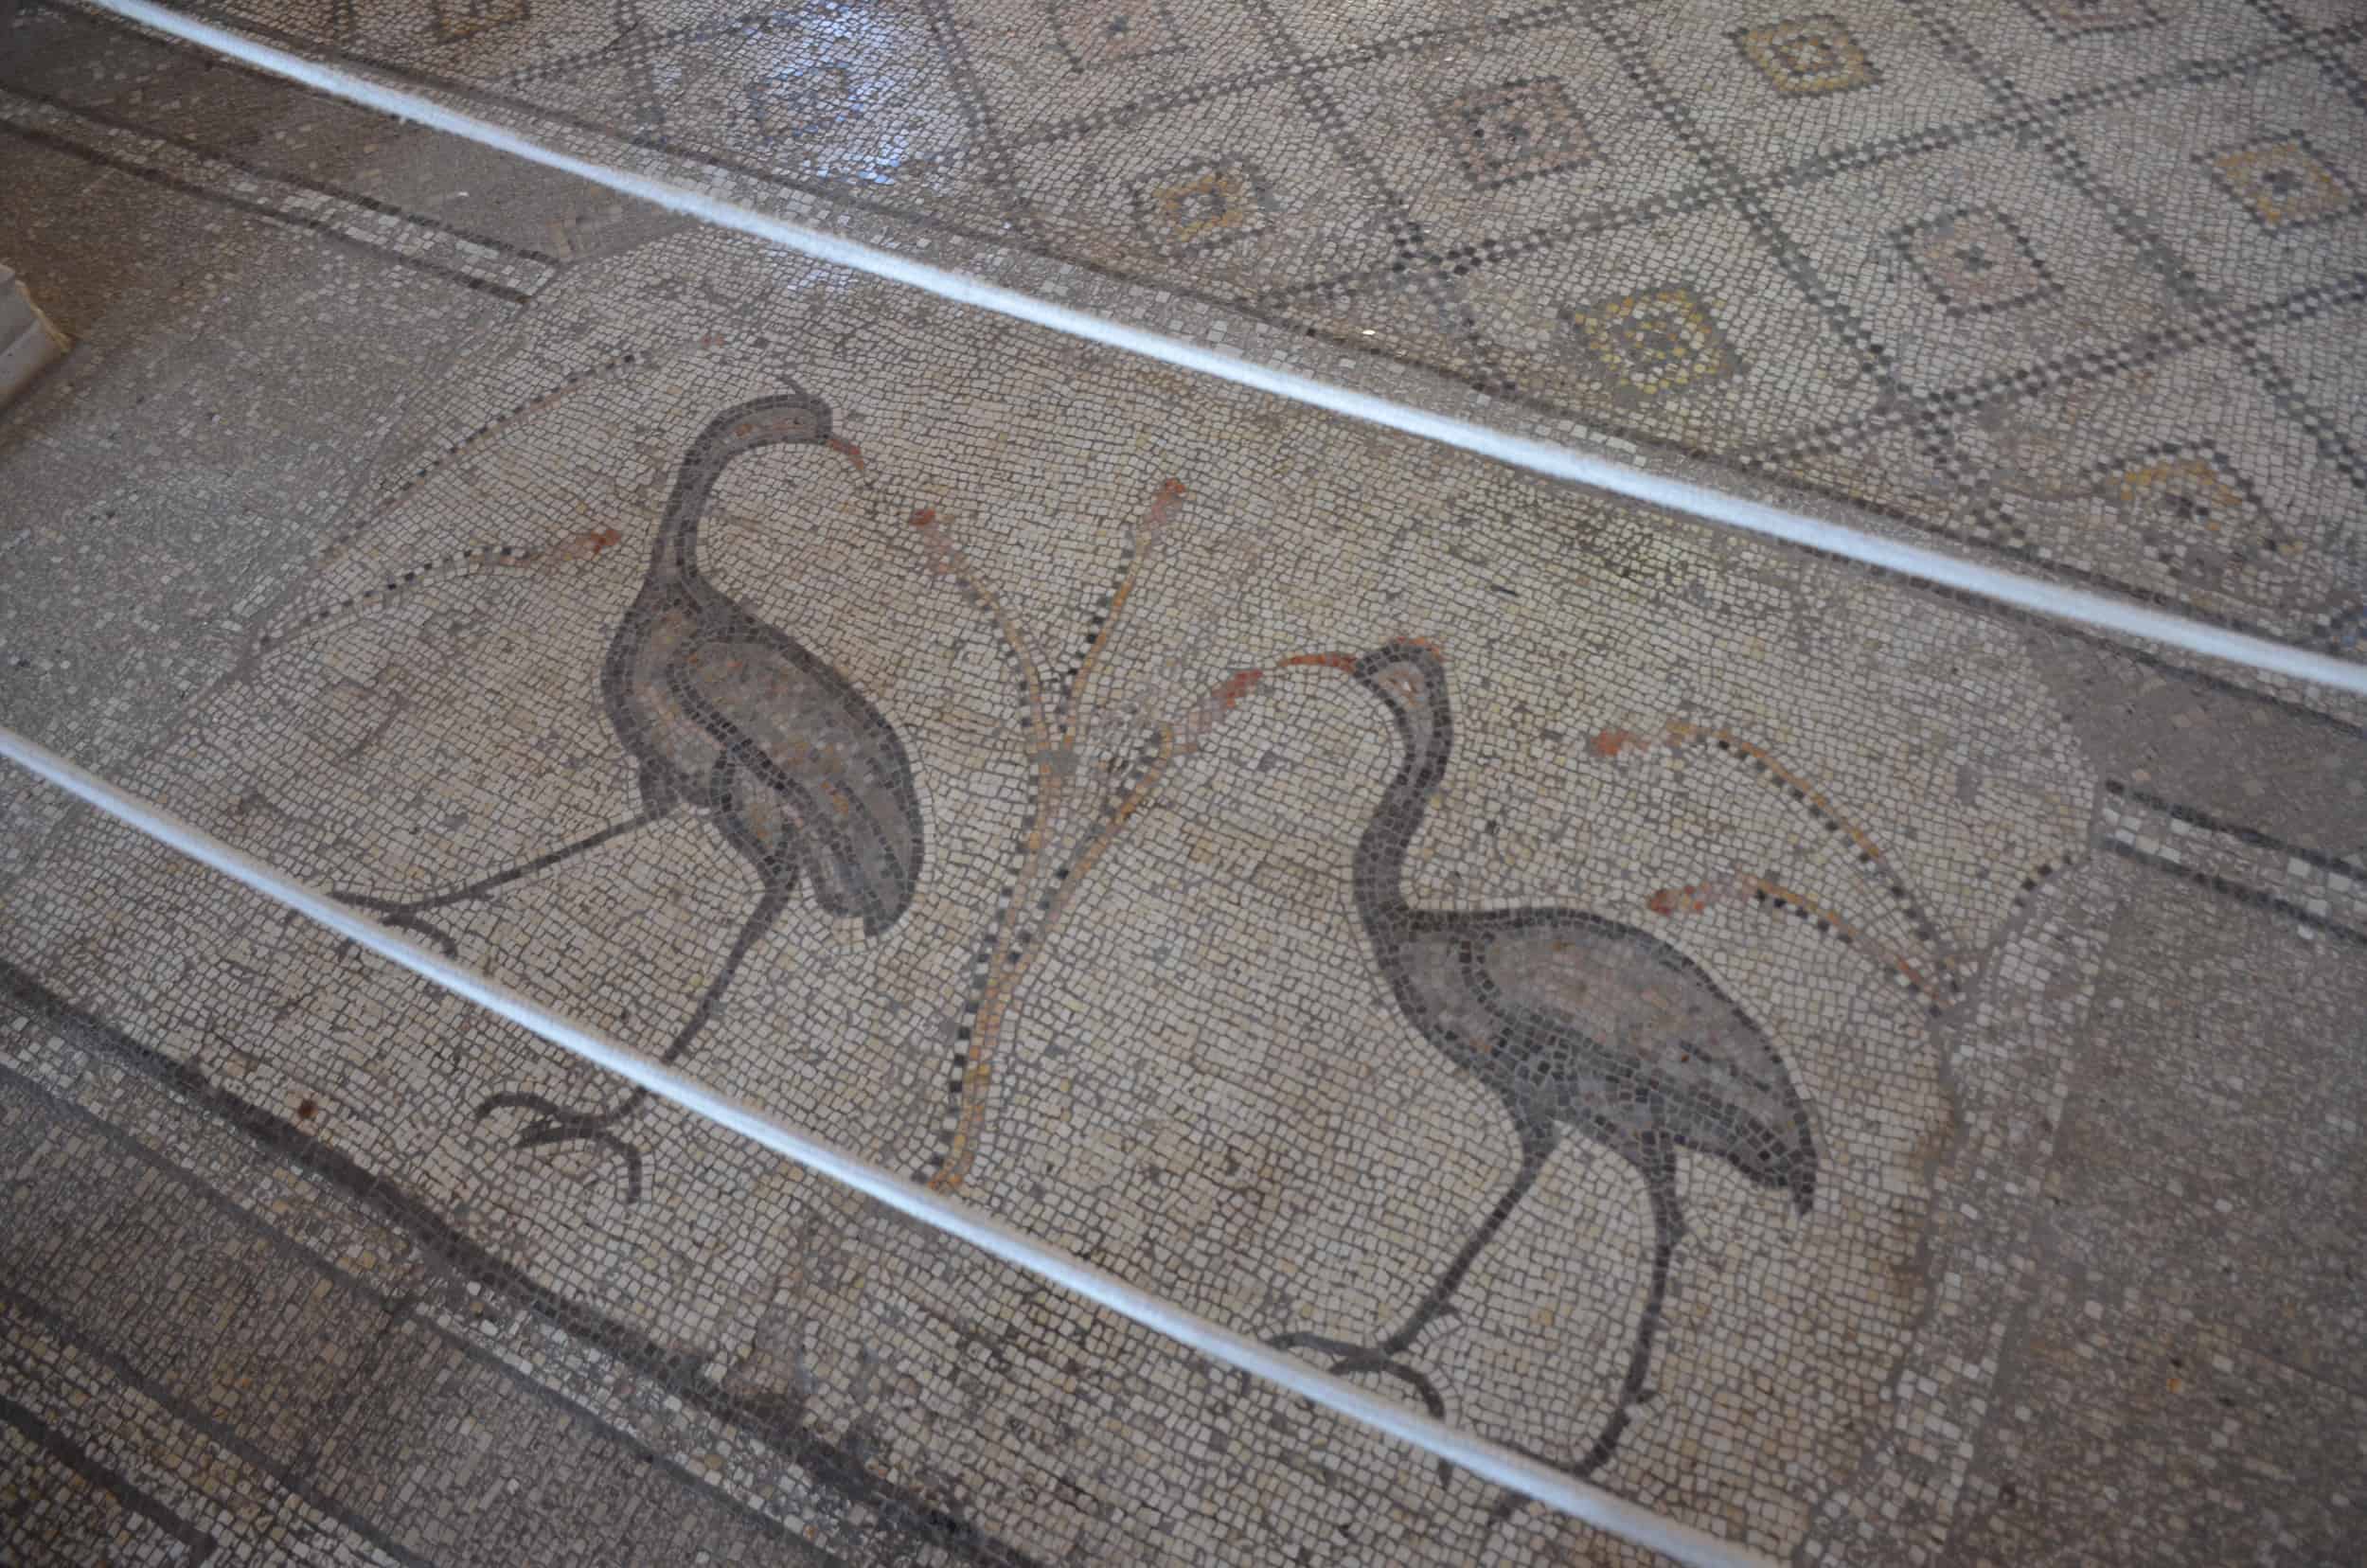 5th century mosaic floor at the Church of the Multiplication in Tabgha, Israel